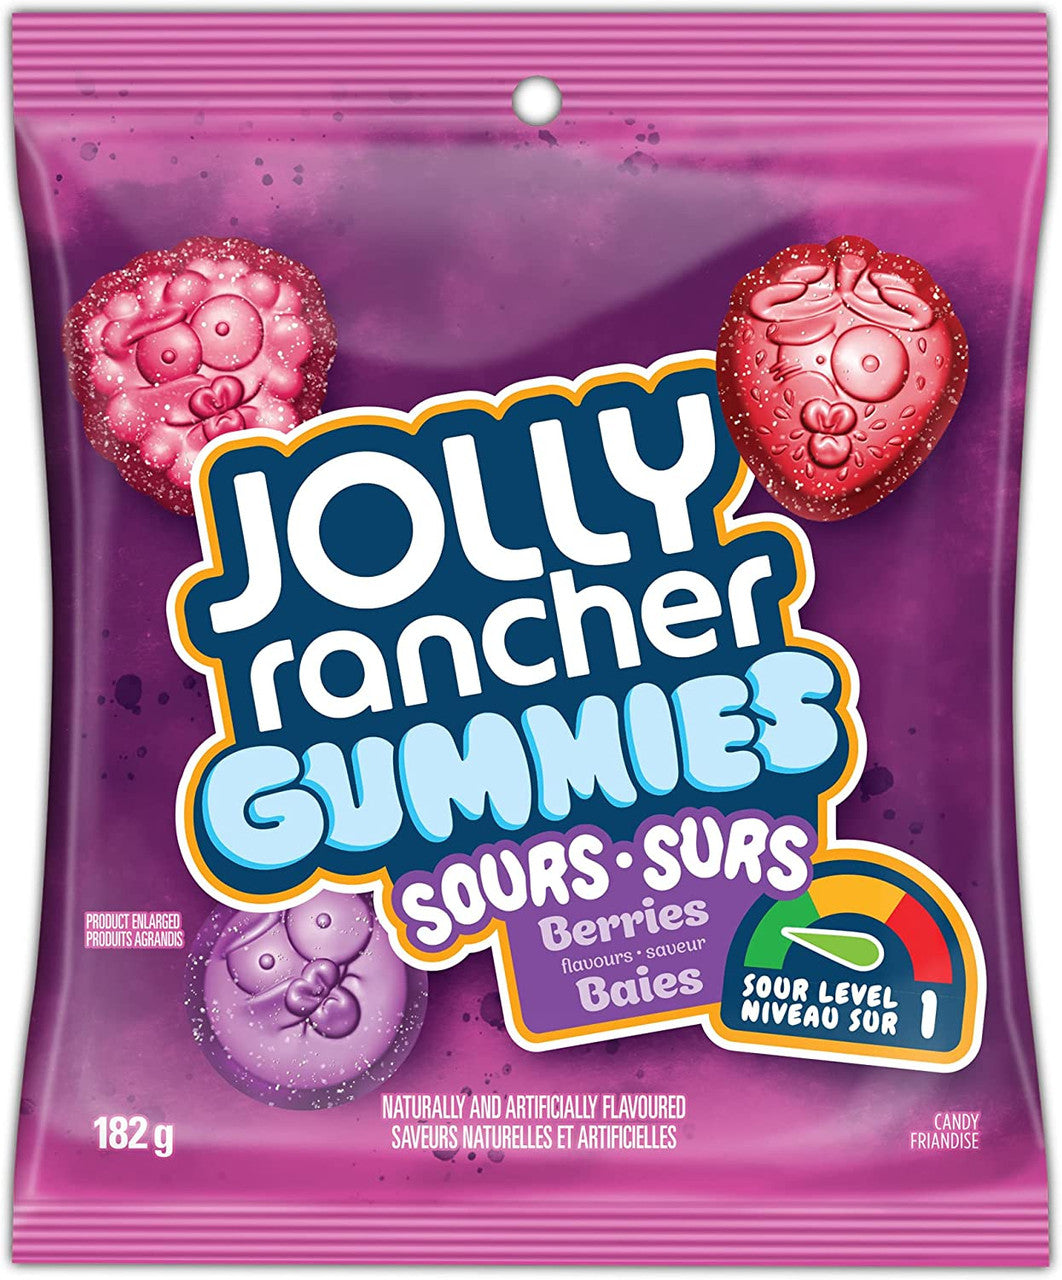 Jolly Rancher Gummies Sours, Berries Flavors, 182g/6.4 oz. {Imported from Canada}